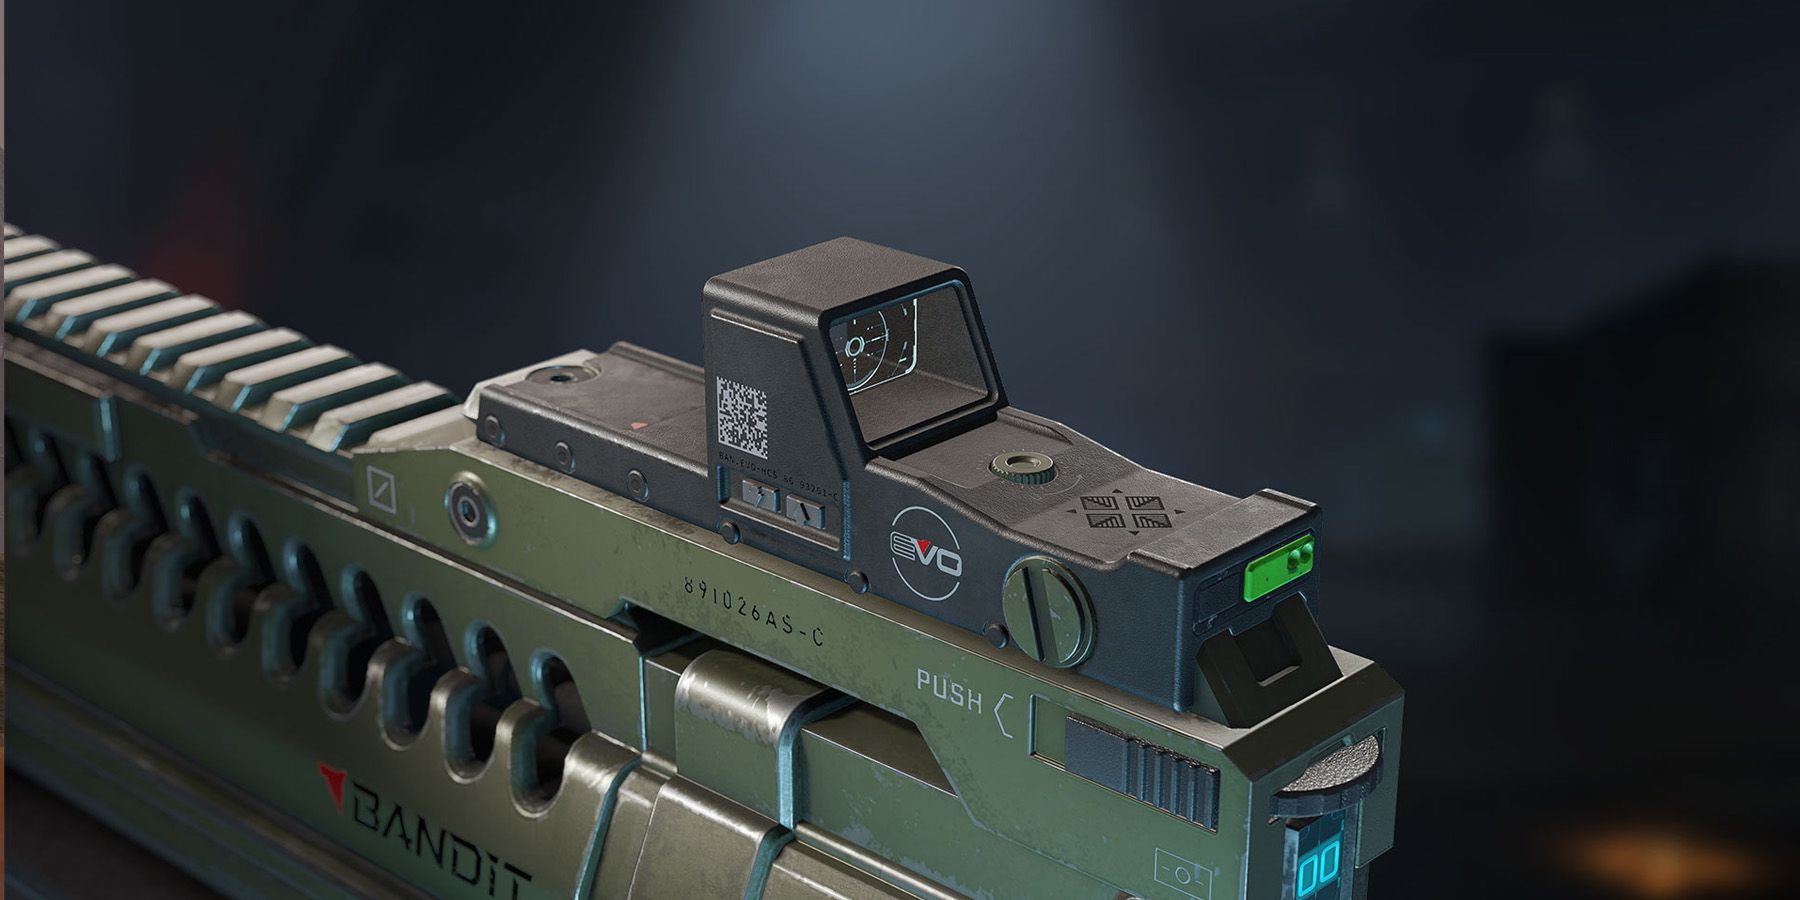 Close-up of the Bandit Evo assault rifle in Halo Infinite.